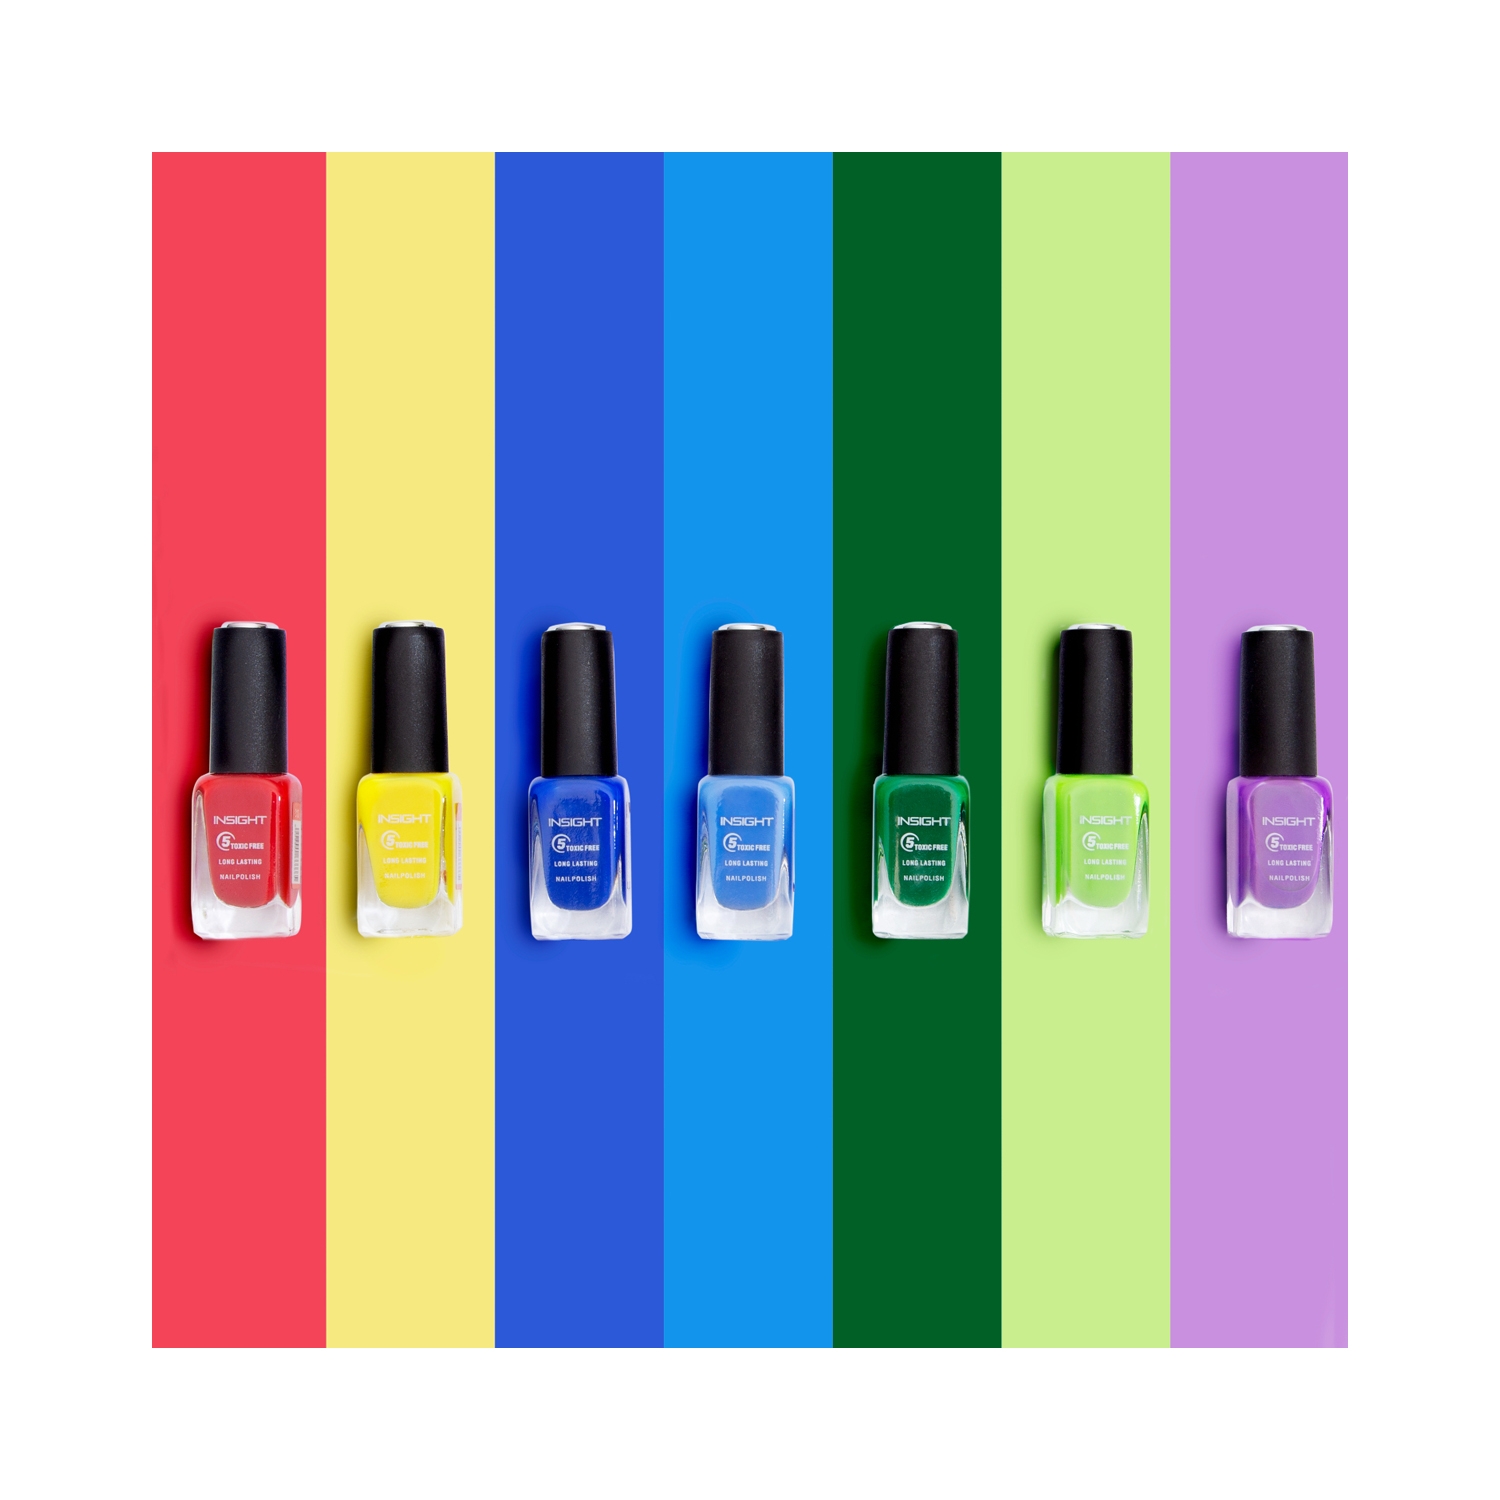 Buy Insight 5 Toxic Free Long Lasting Nail Polish Online at Low Prices in  India - Amazon.in